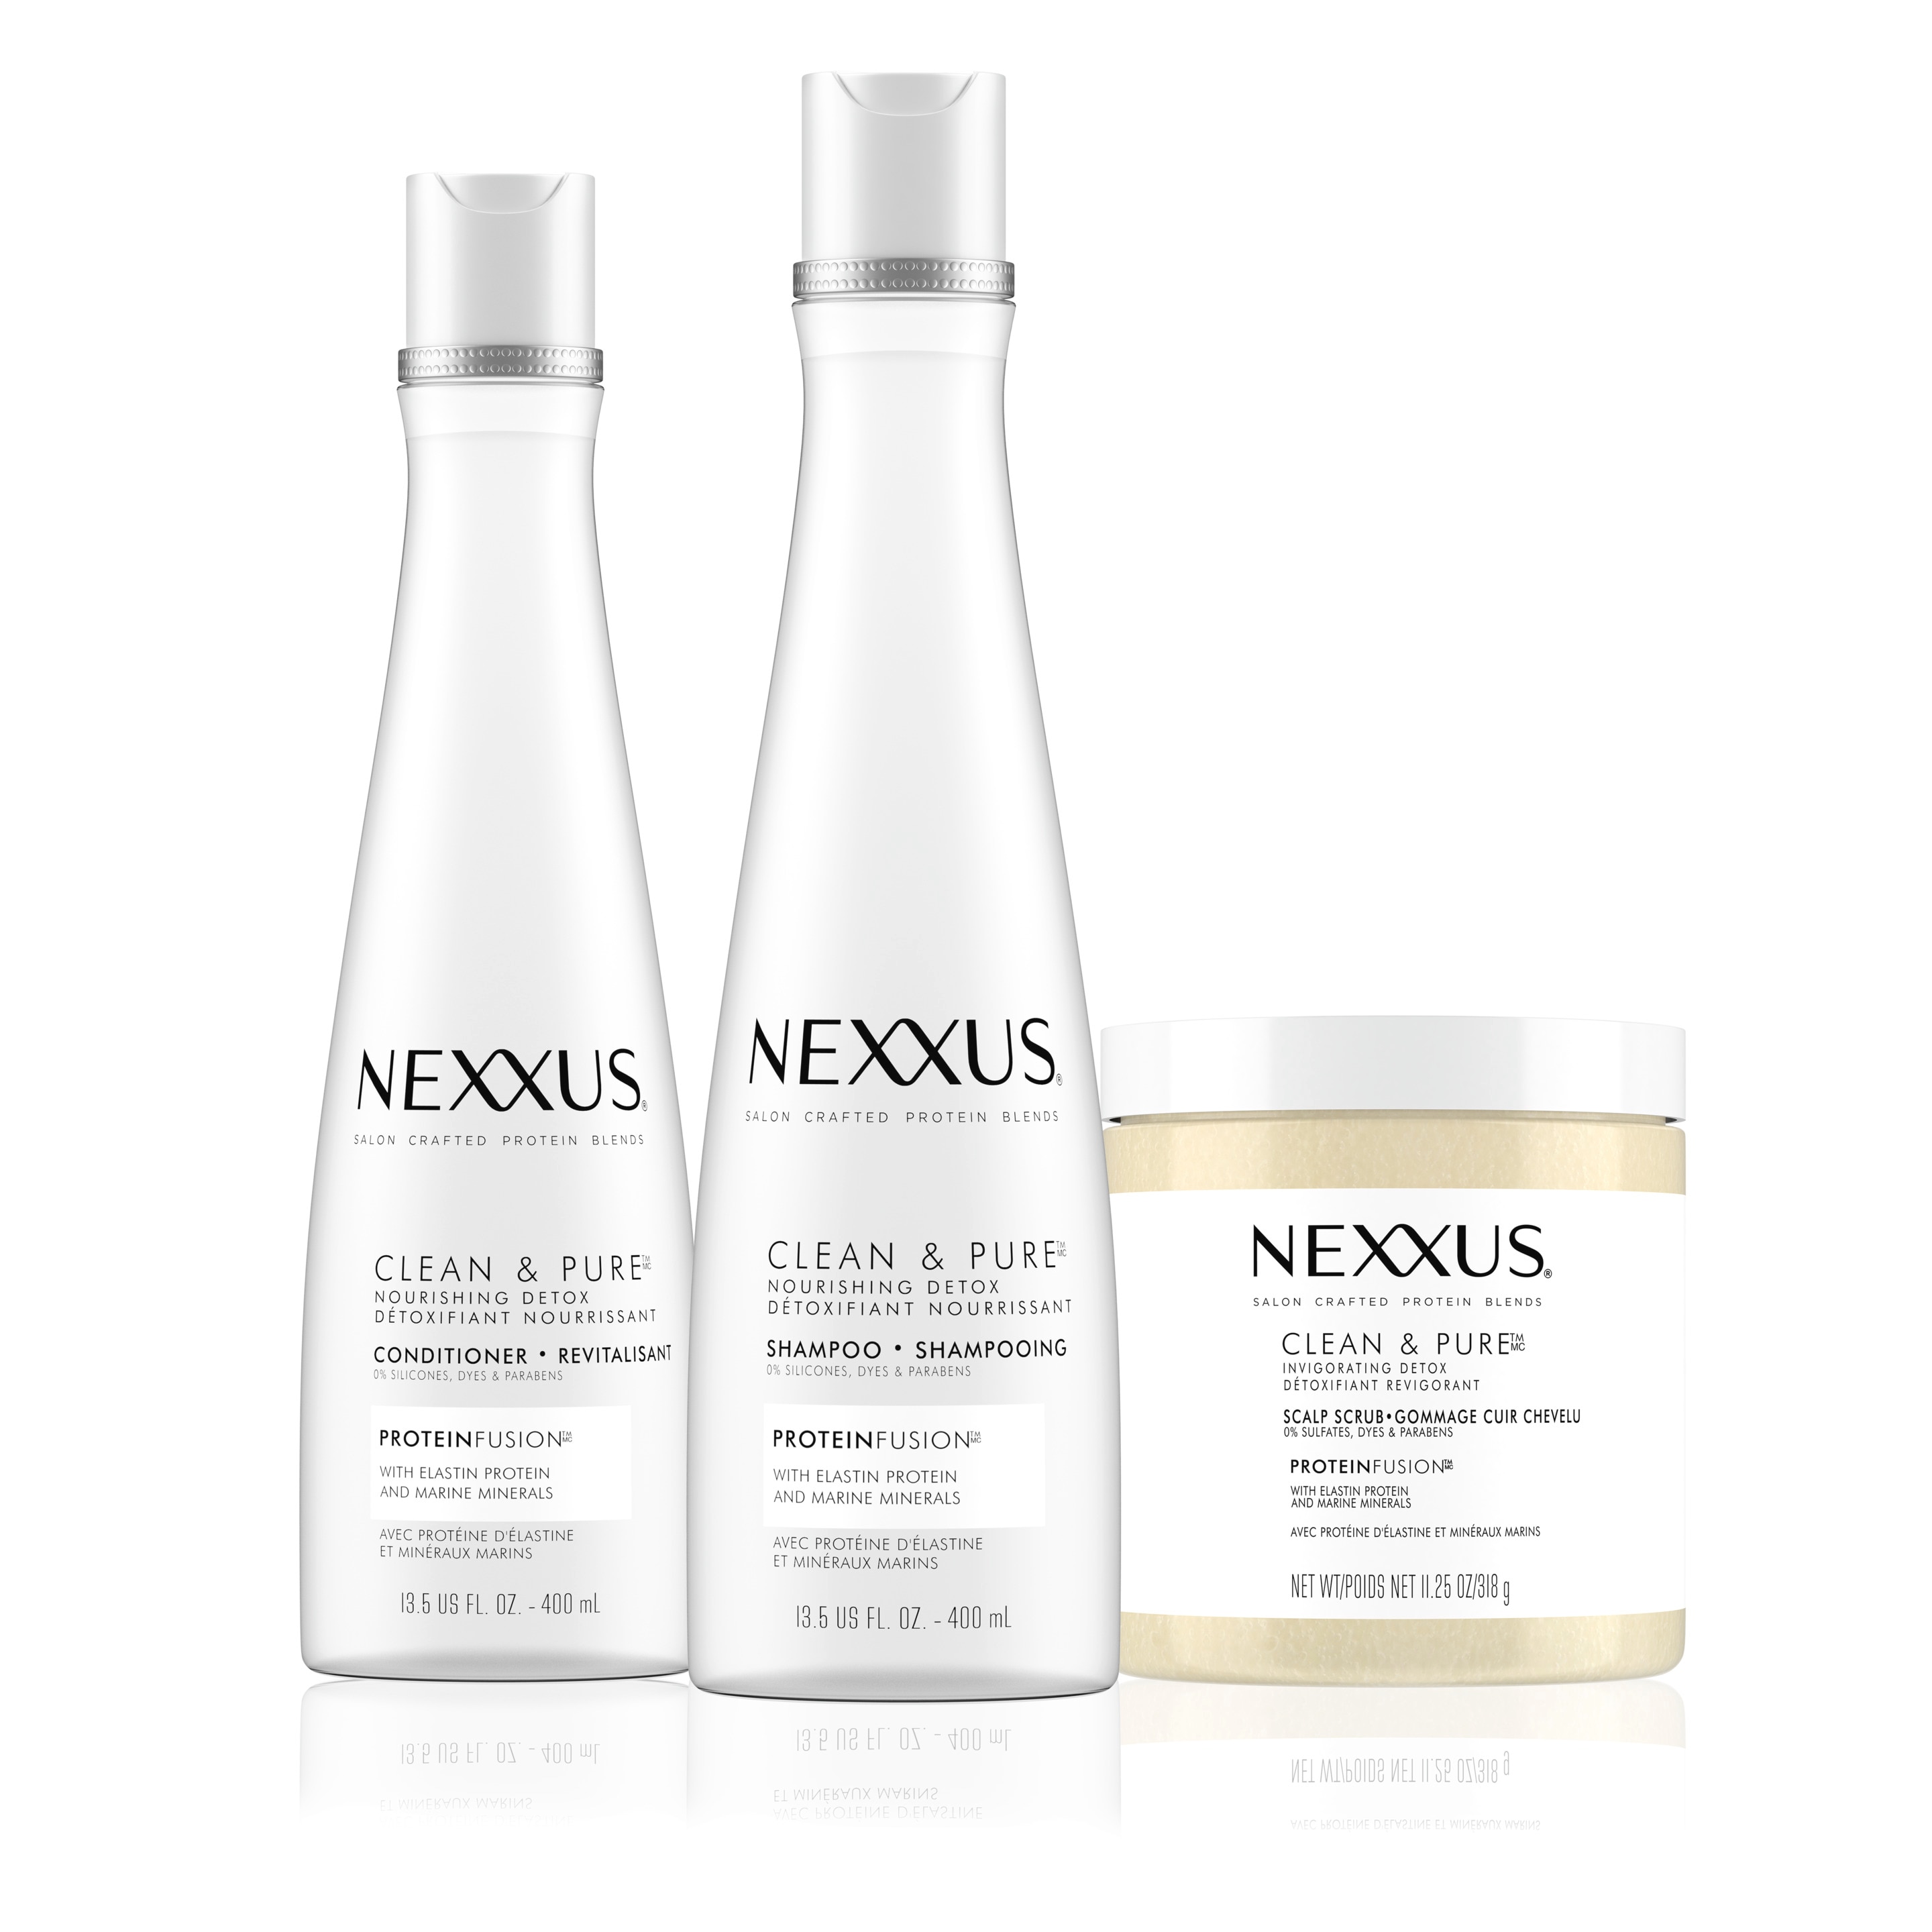 Nexxus Clean & Pure hair care collection